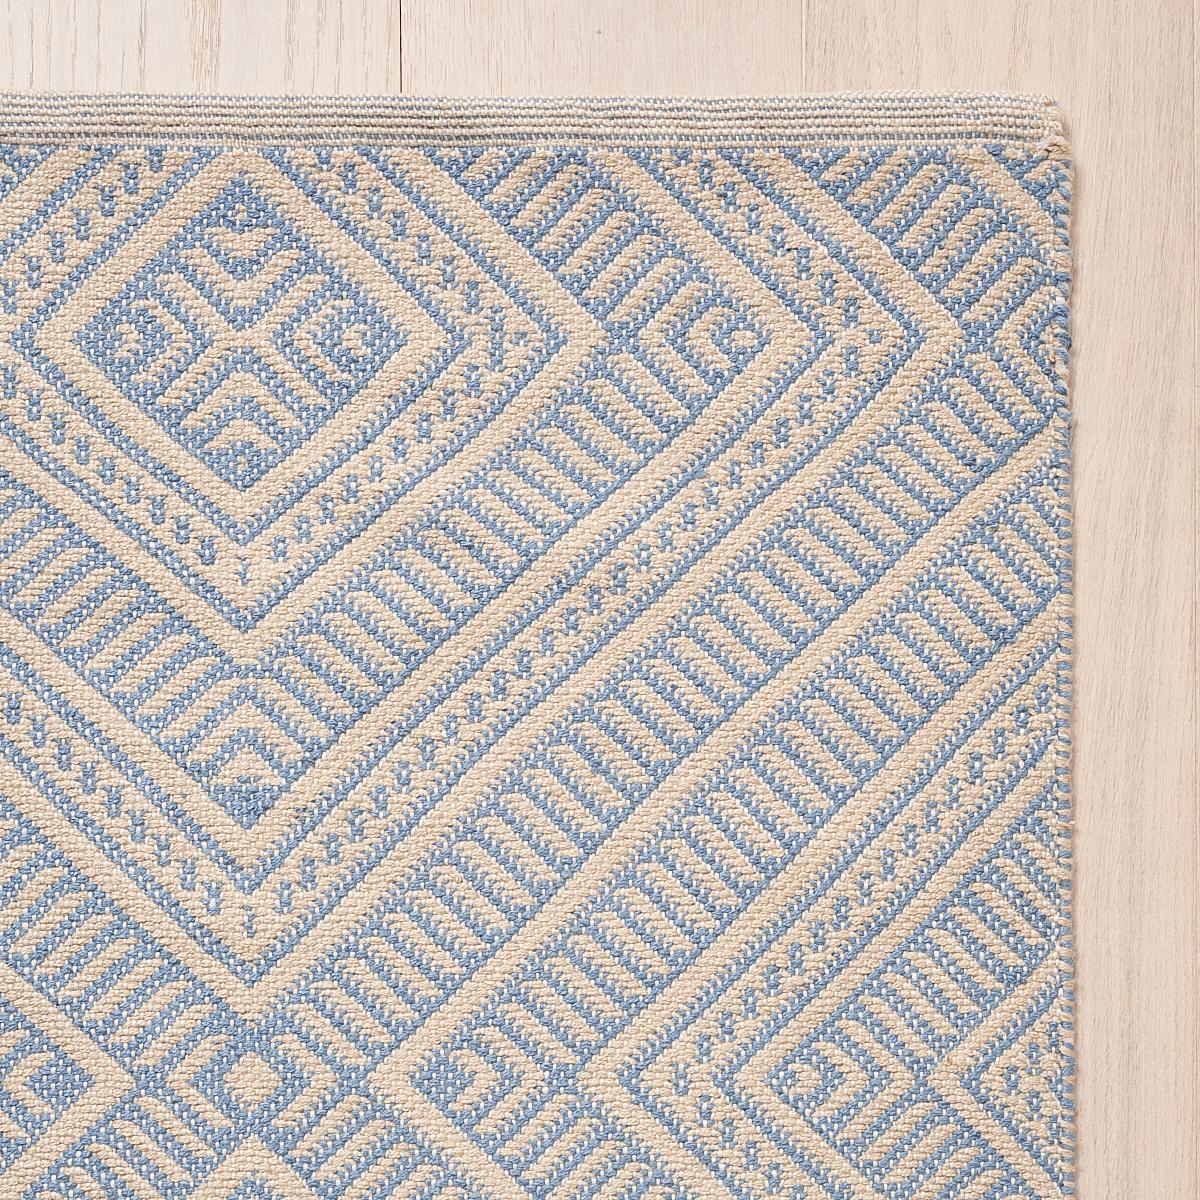 This rug will ship in December. Made of soft yet super-durable PET, Tortola is as stylish as it is practical. Inspired by one of our bestselling indoor/outdoor textiles, this large-scale concentric diamond rug makes a smart statement while resisting